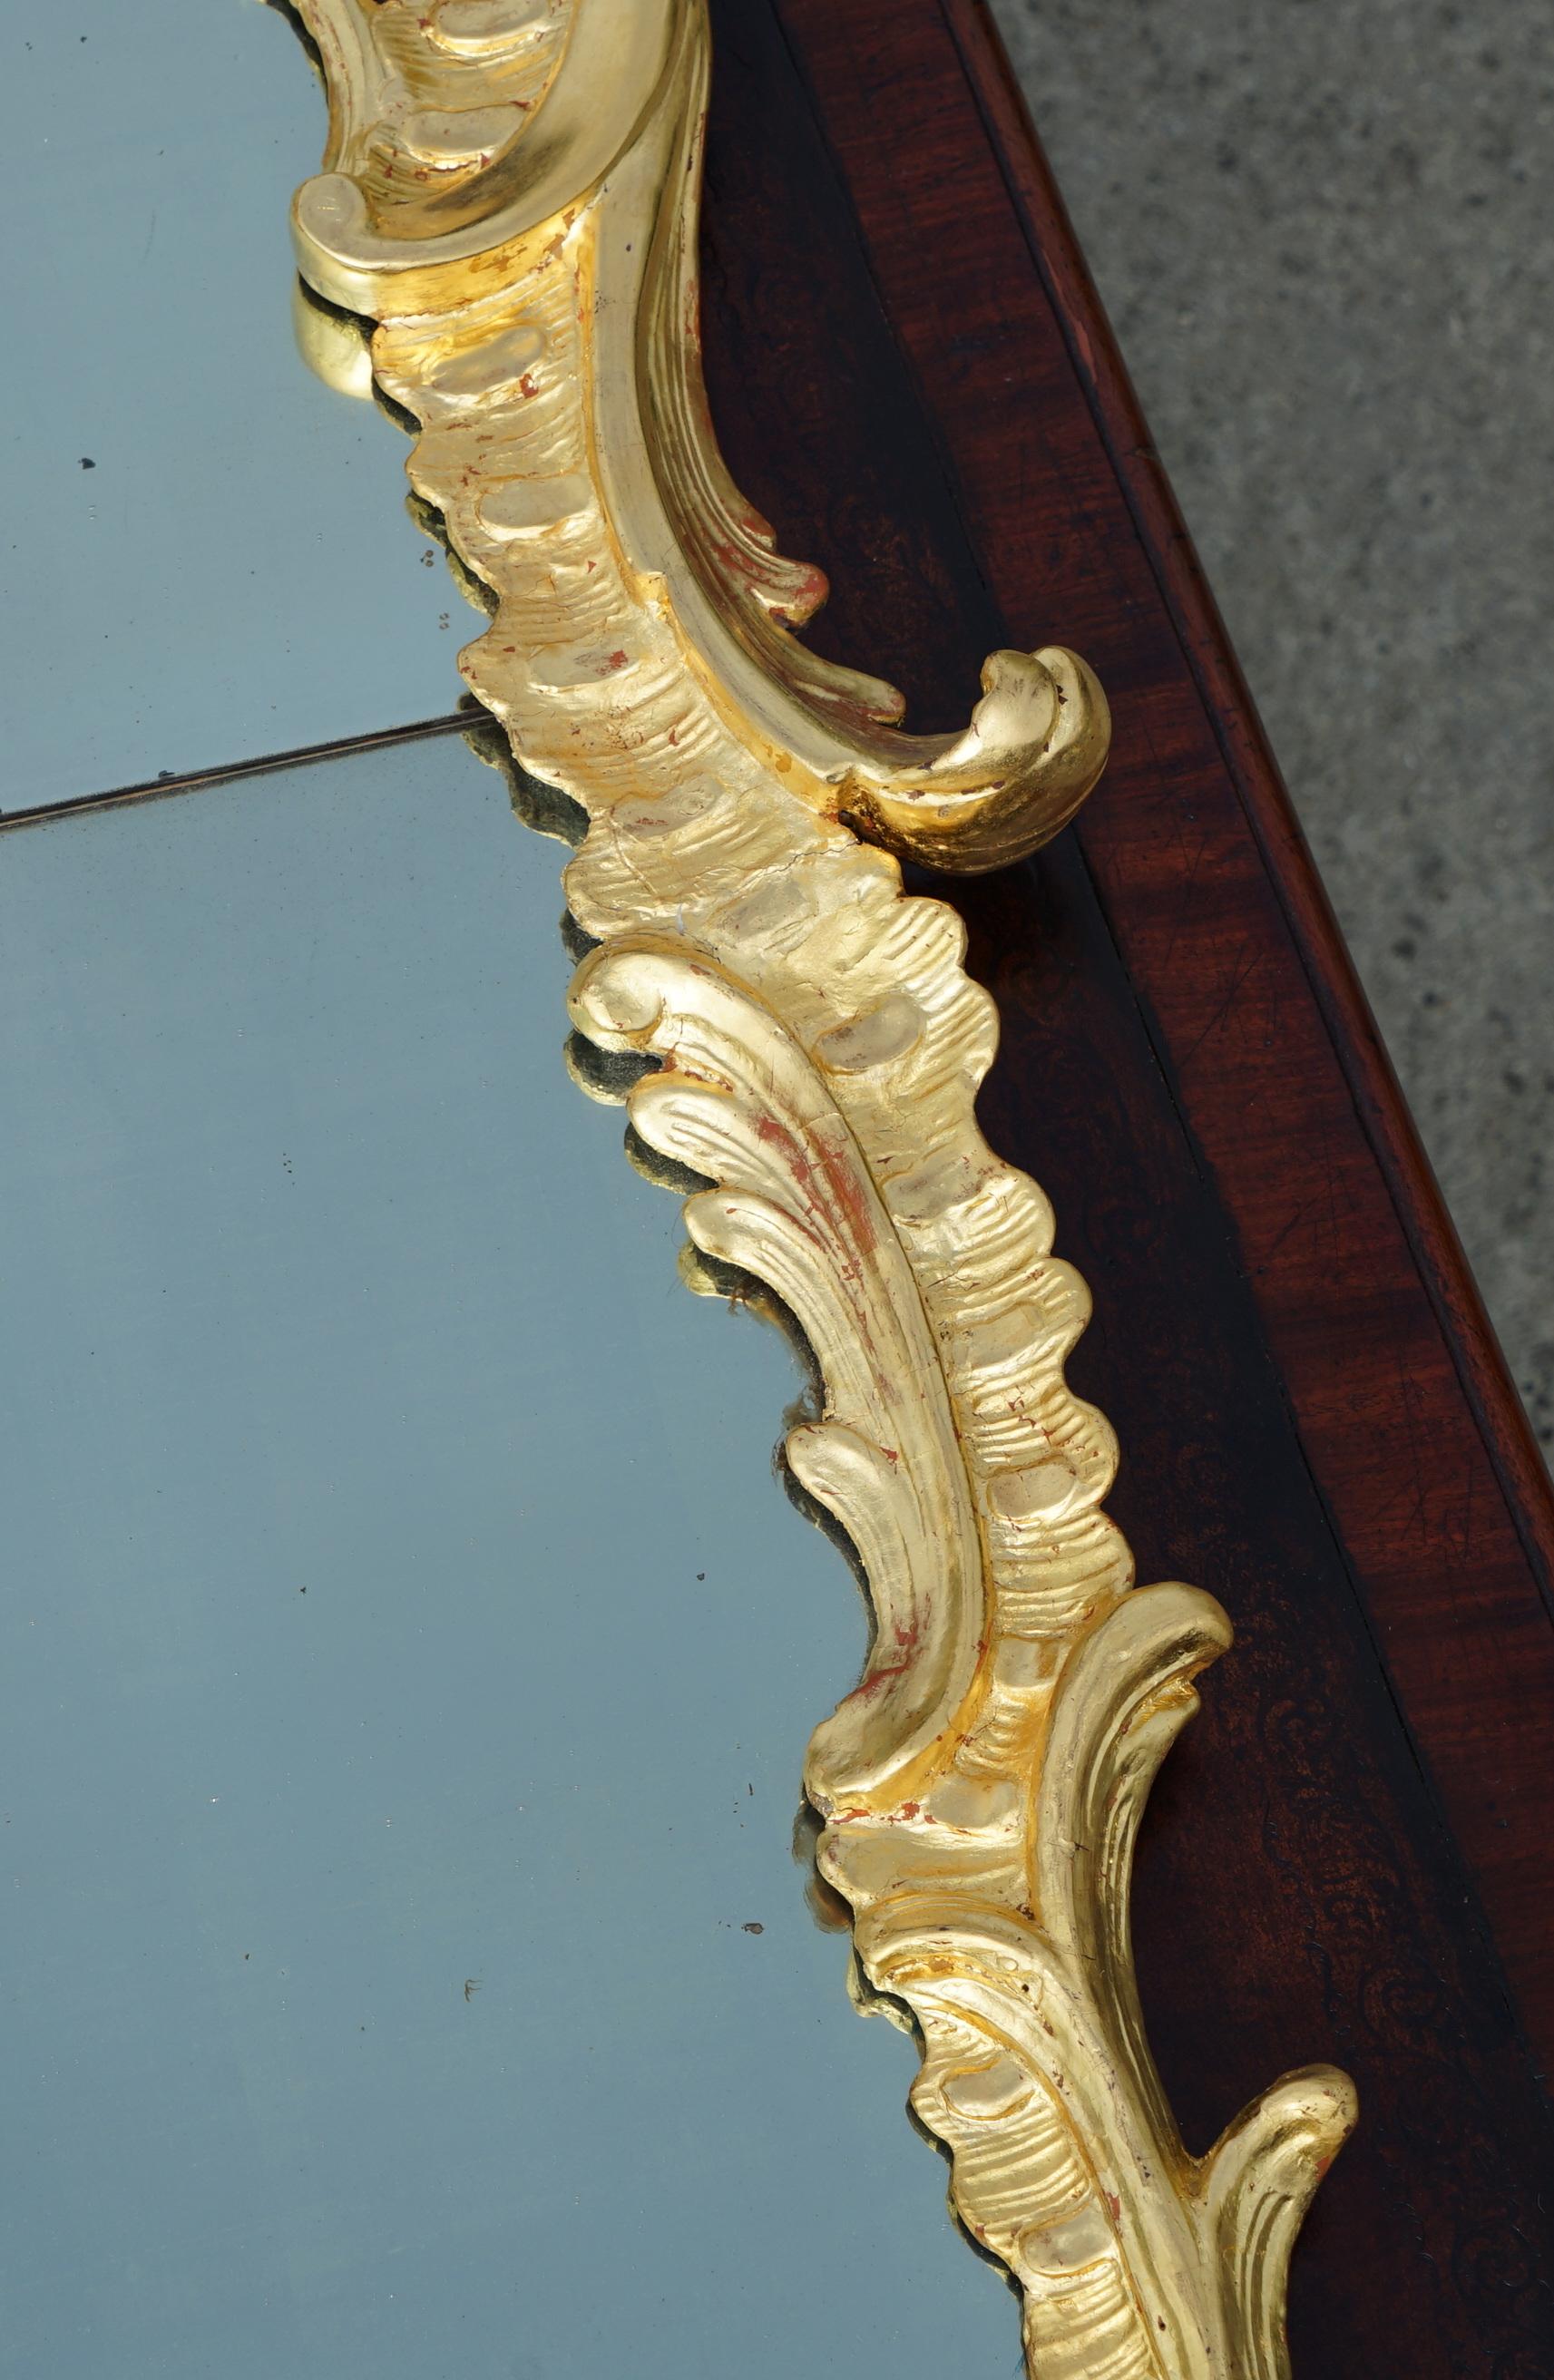 Mirror EXQUISITE FRENCH ANTIQUE LOUIS XV PERIOD 1770 GOLD GILT MiRROR WITH FOXED PLATE For Sale